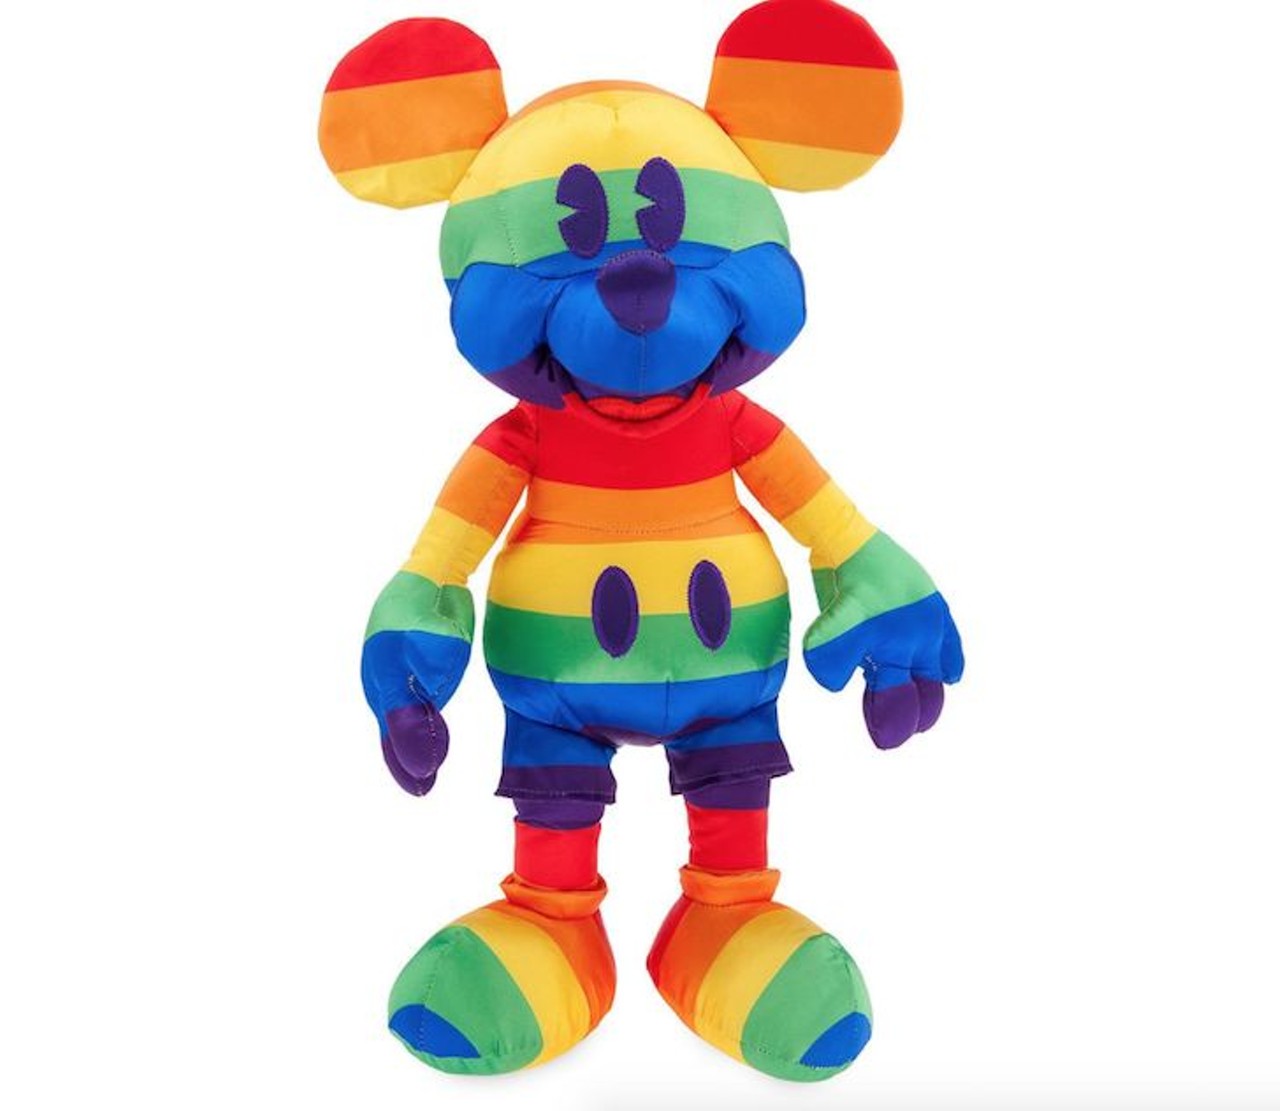 Mickey Mouse Plush
An all-over rainbow design decorates this 15 &frac12;&#148; tall Mickey Mouse Plush in satin fabric for $24.95.
Photo via shopDisney